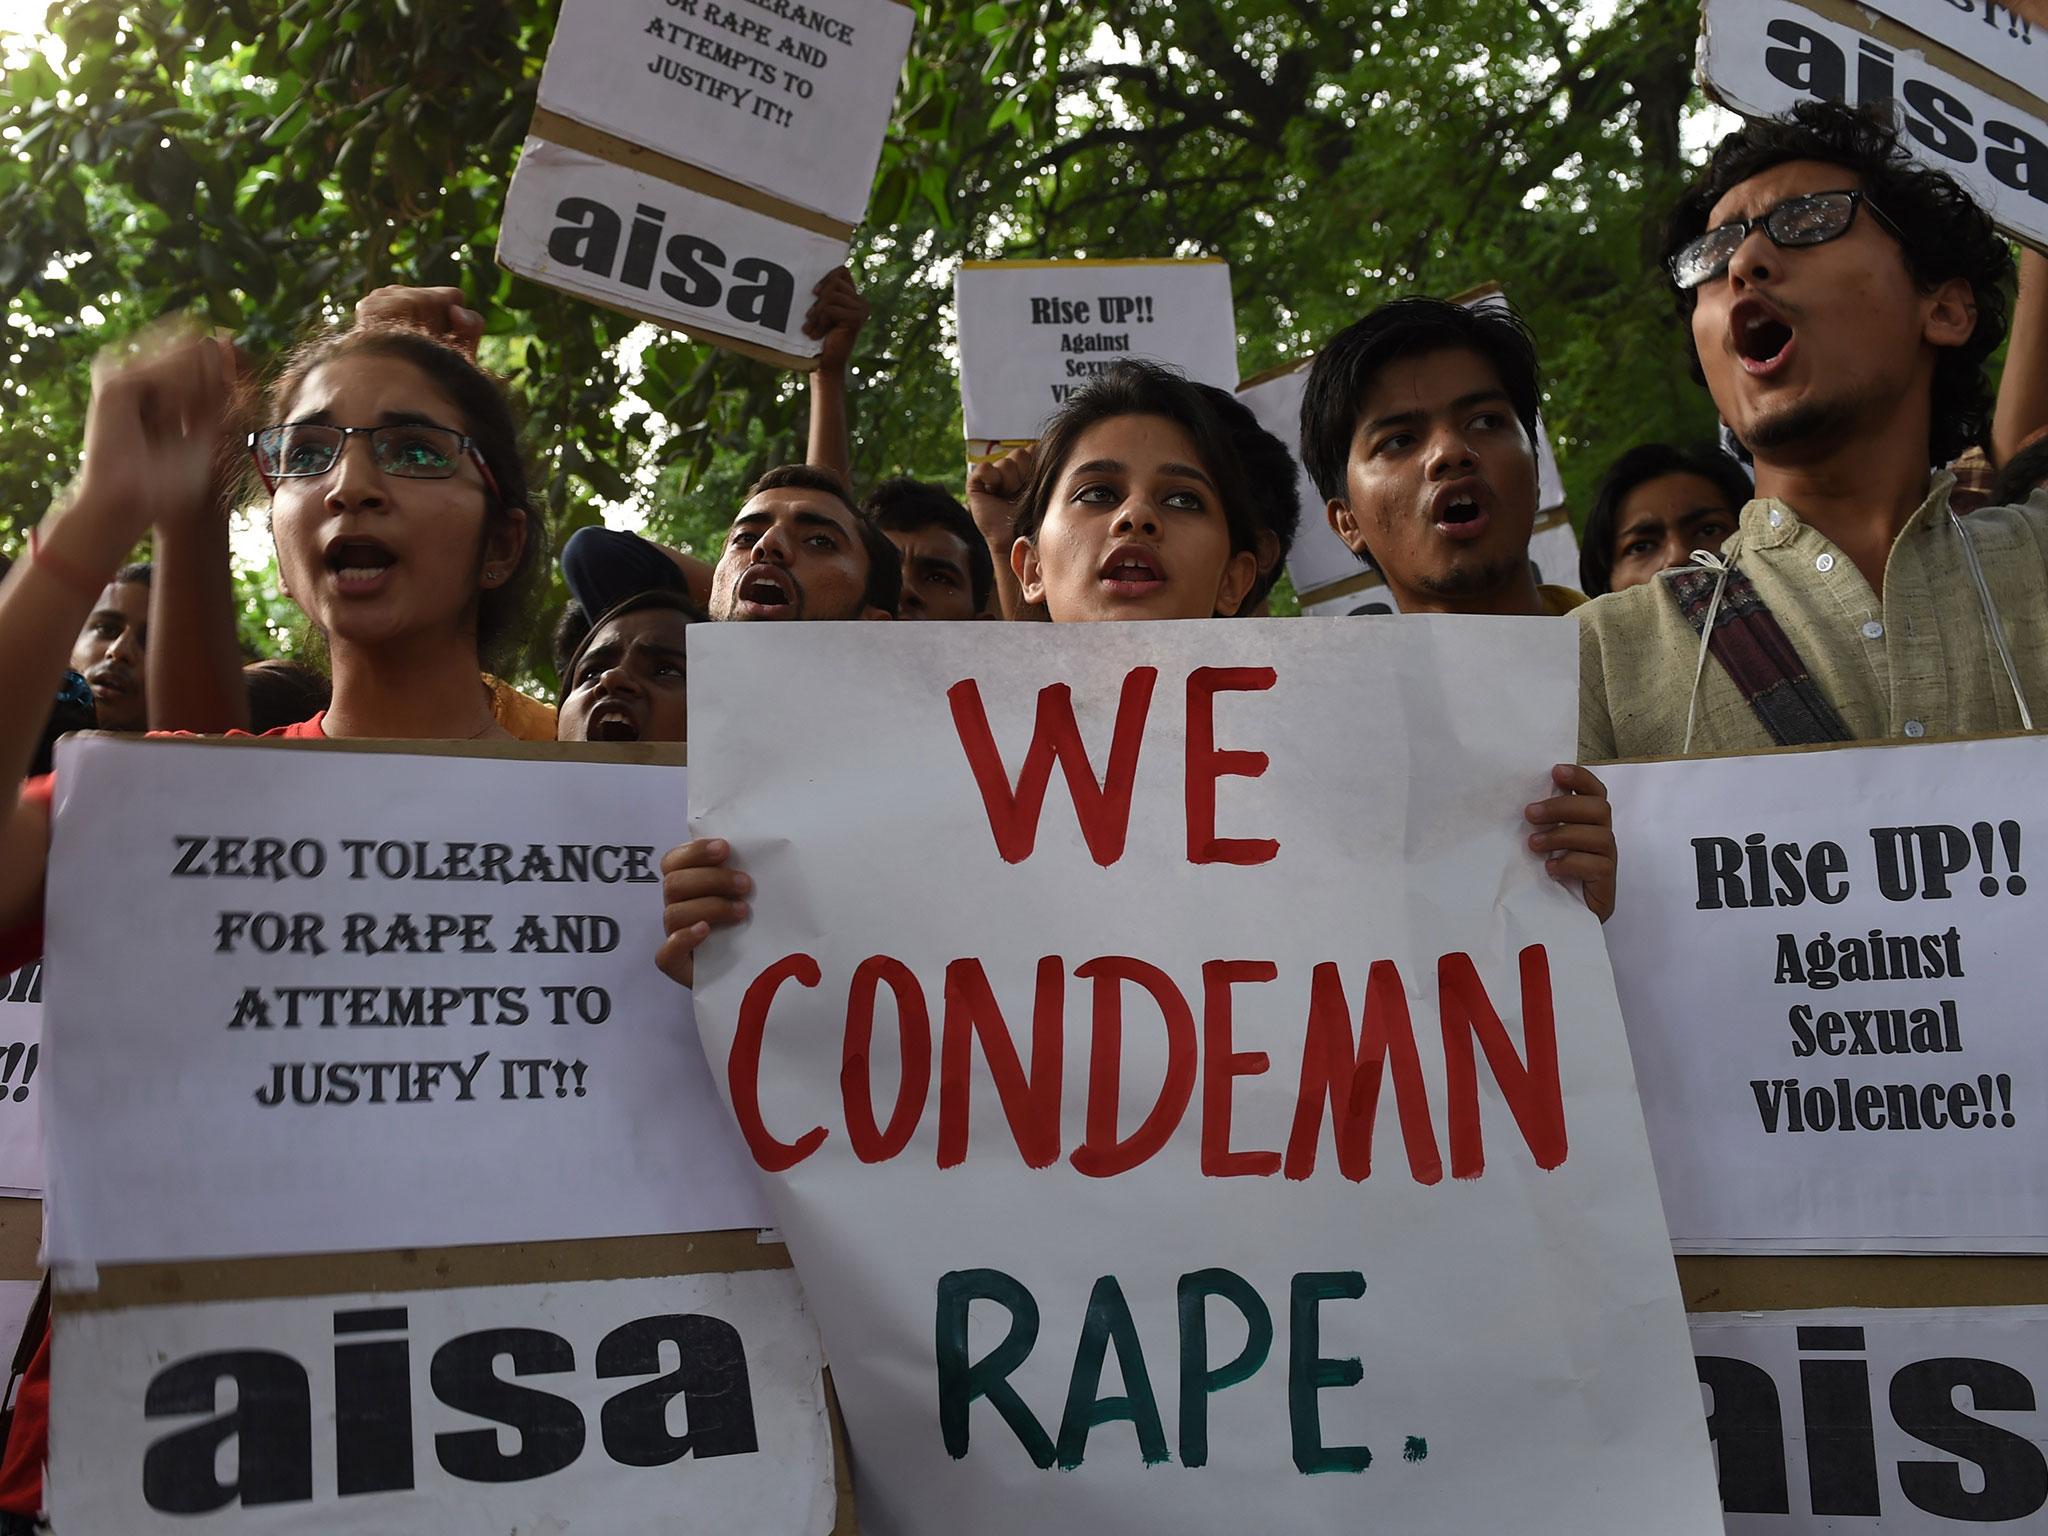 Tarlac Gang Rape - Gang rape' of student prompts arrests after video causes outcry in India |  The Independent | The Independent